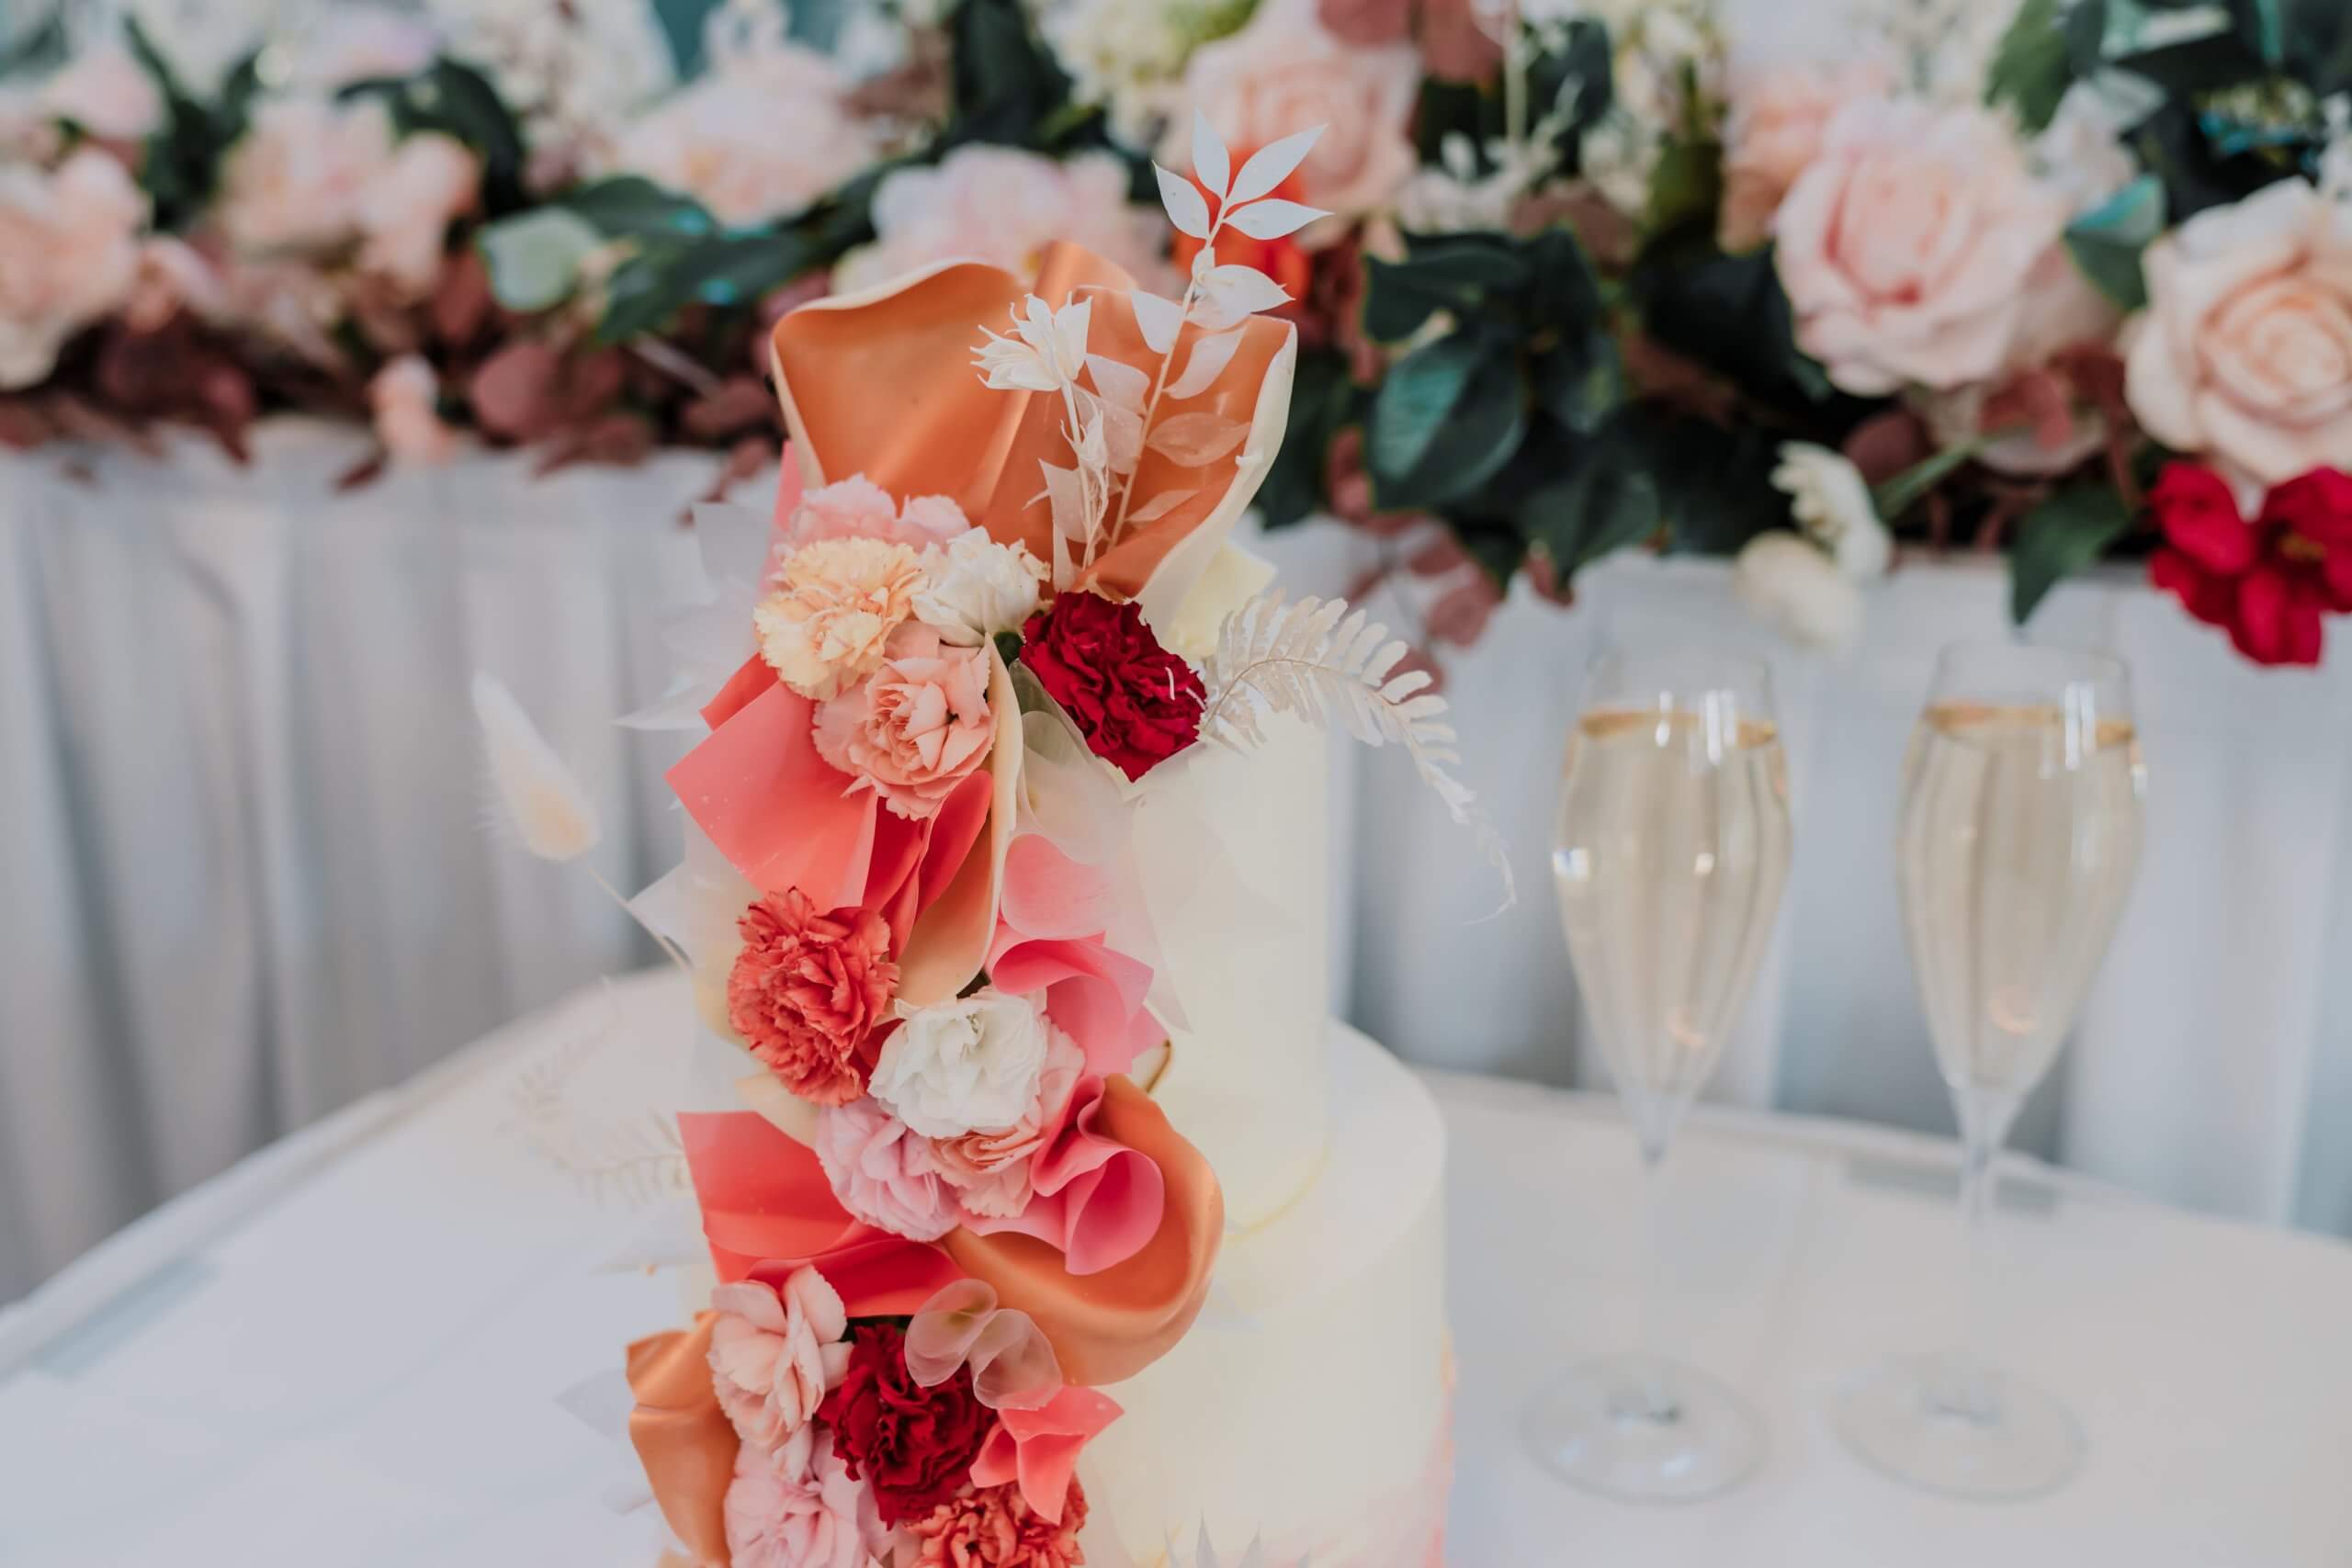 White frosted wedding cake with orange, pink, red, and burgundy flowers.